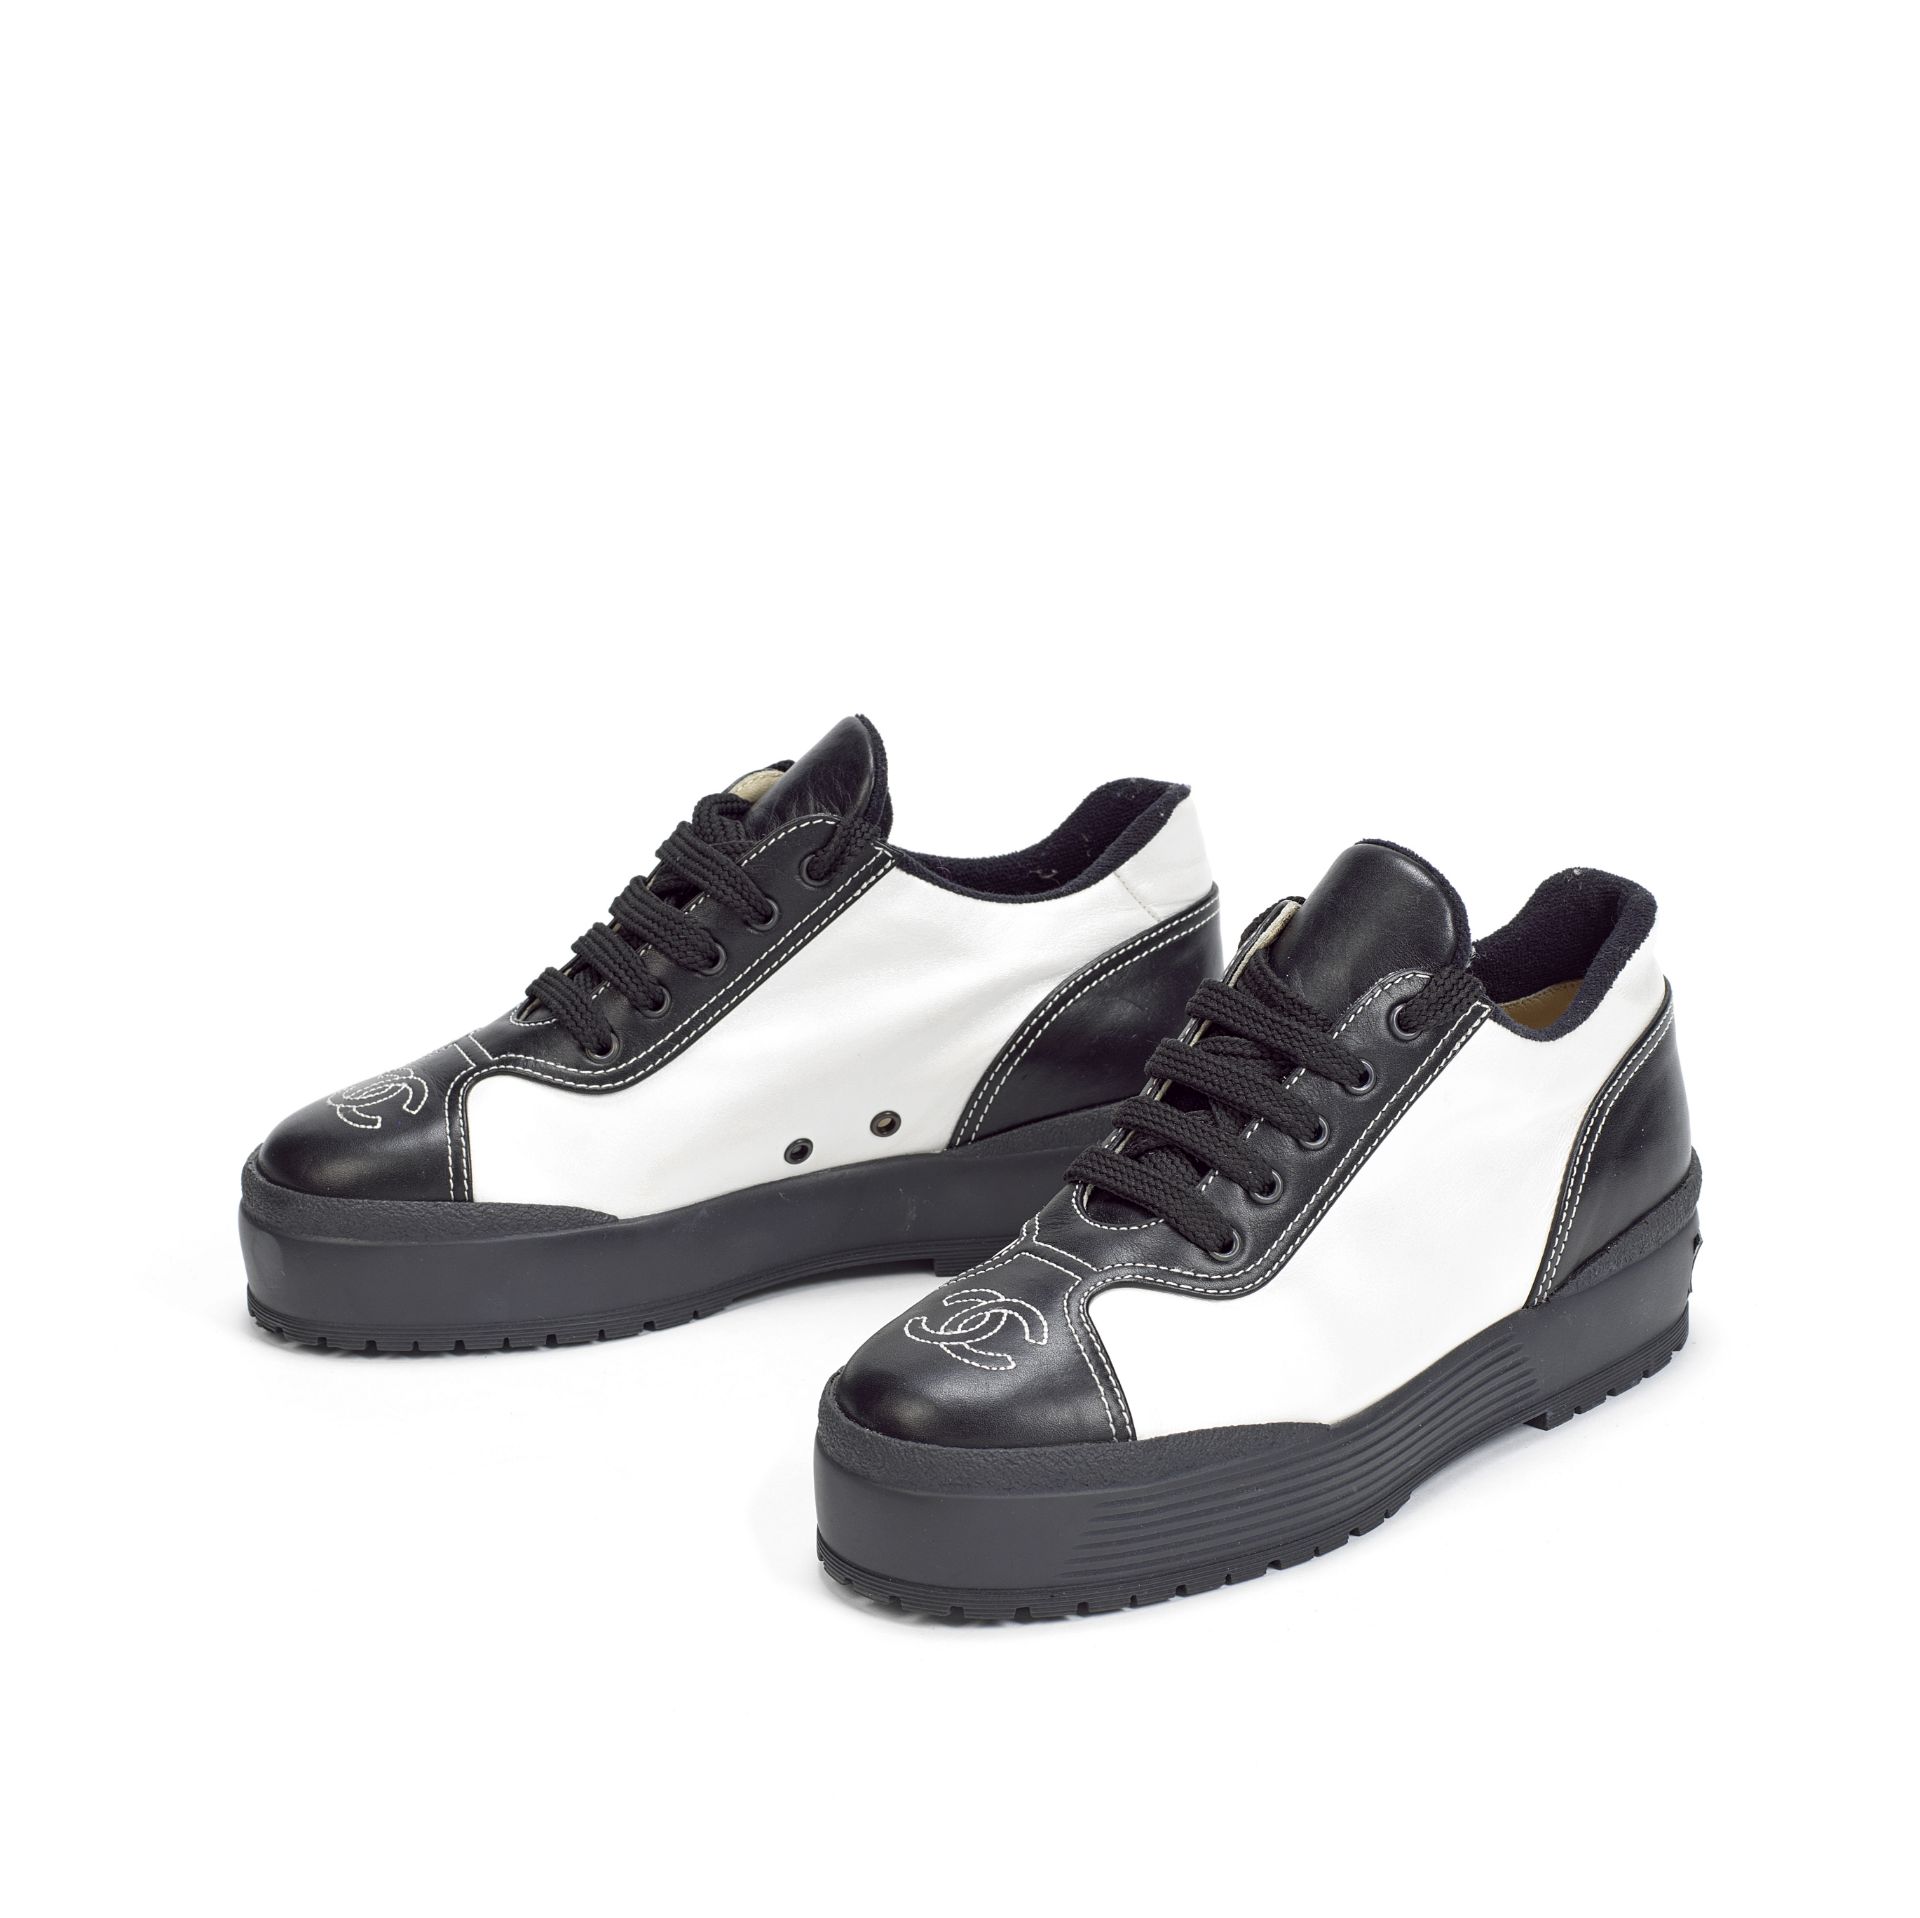 Black and White Platform Trainers, Chanel, 1990s,